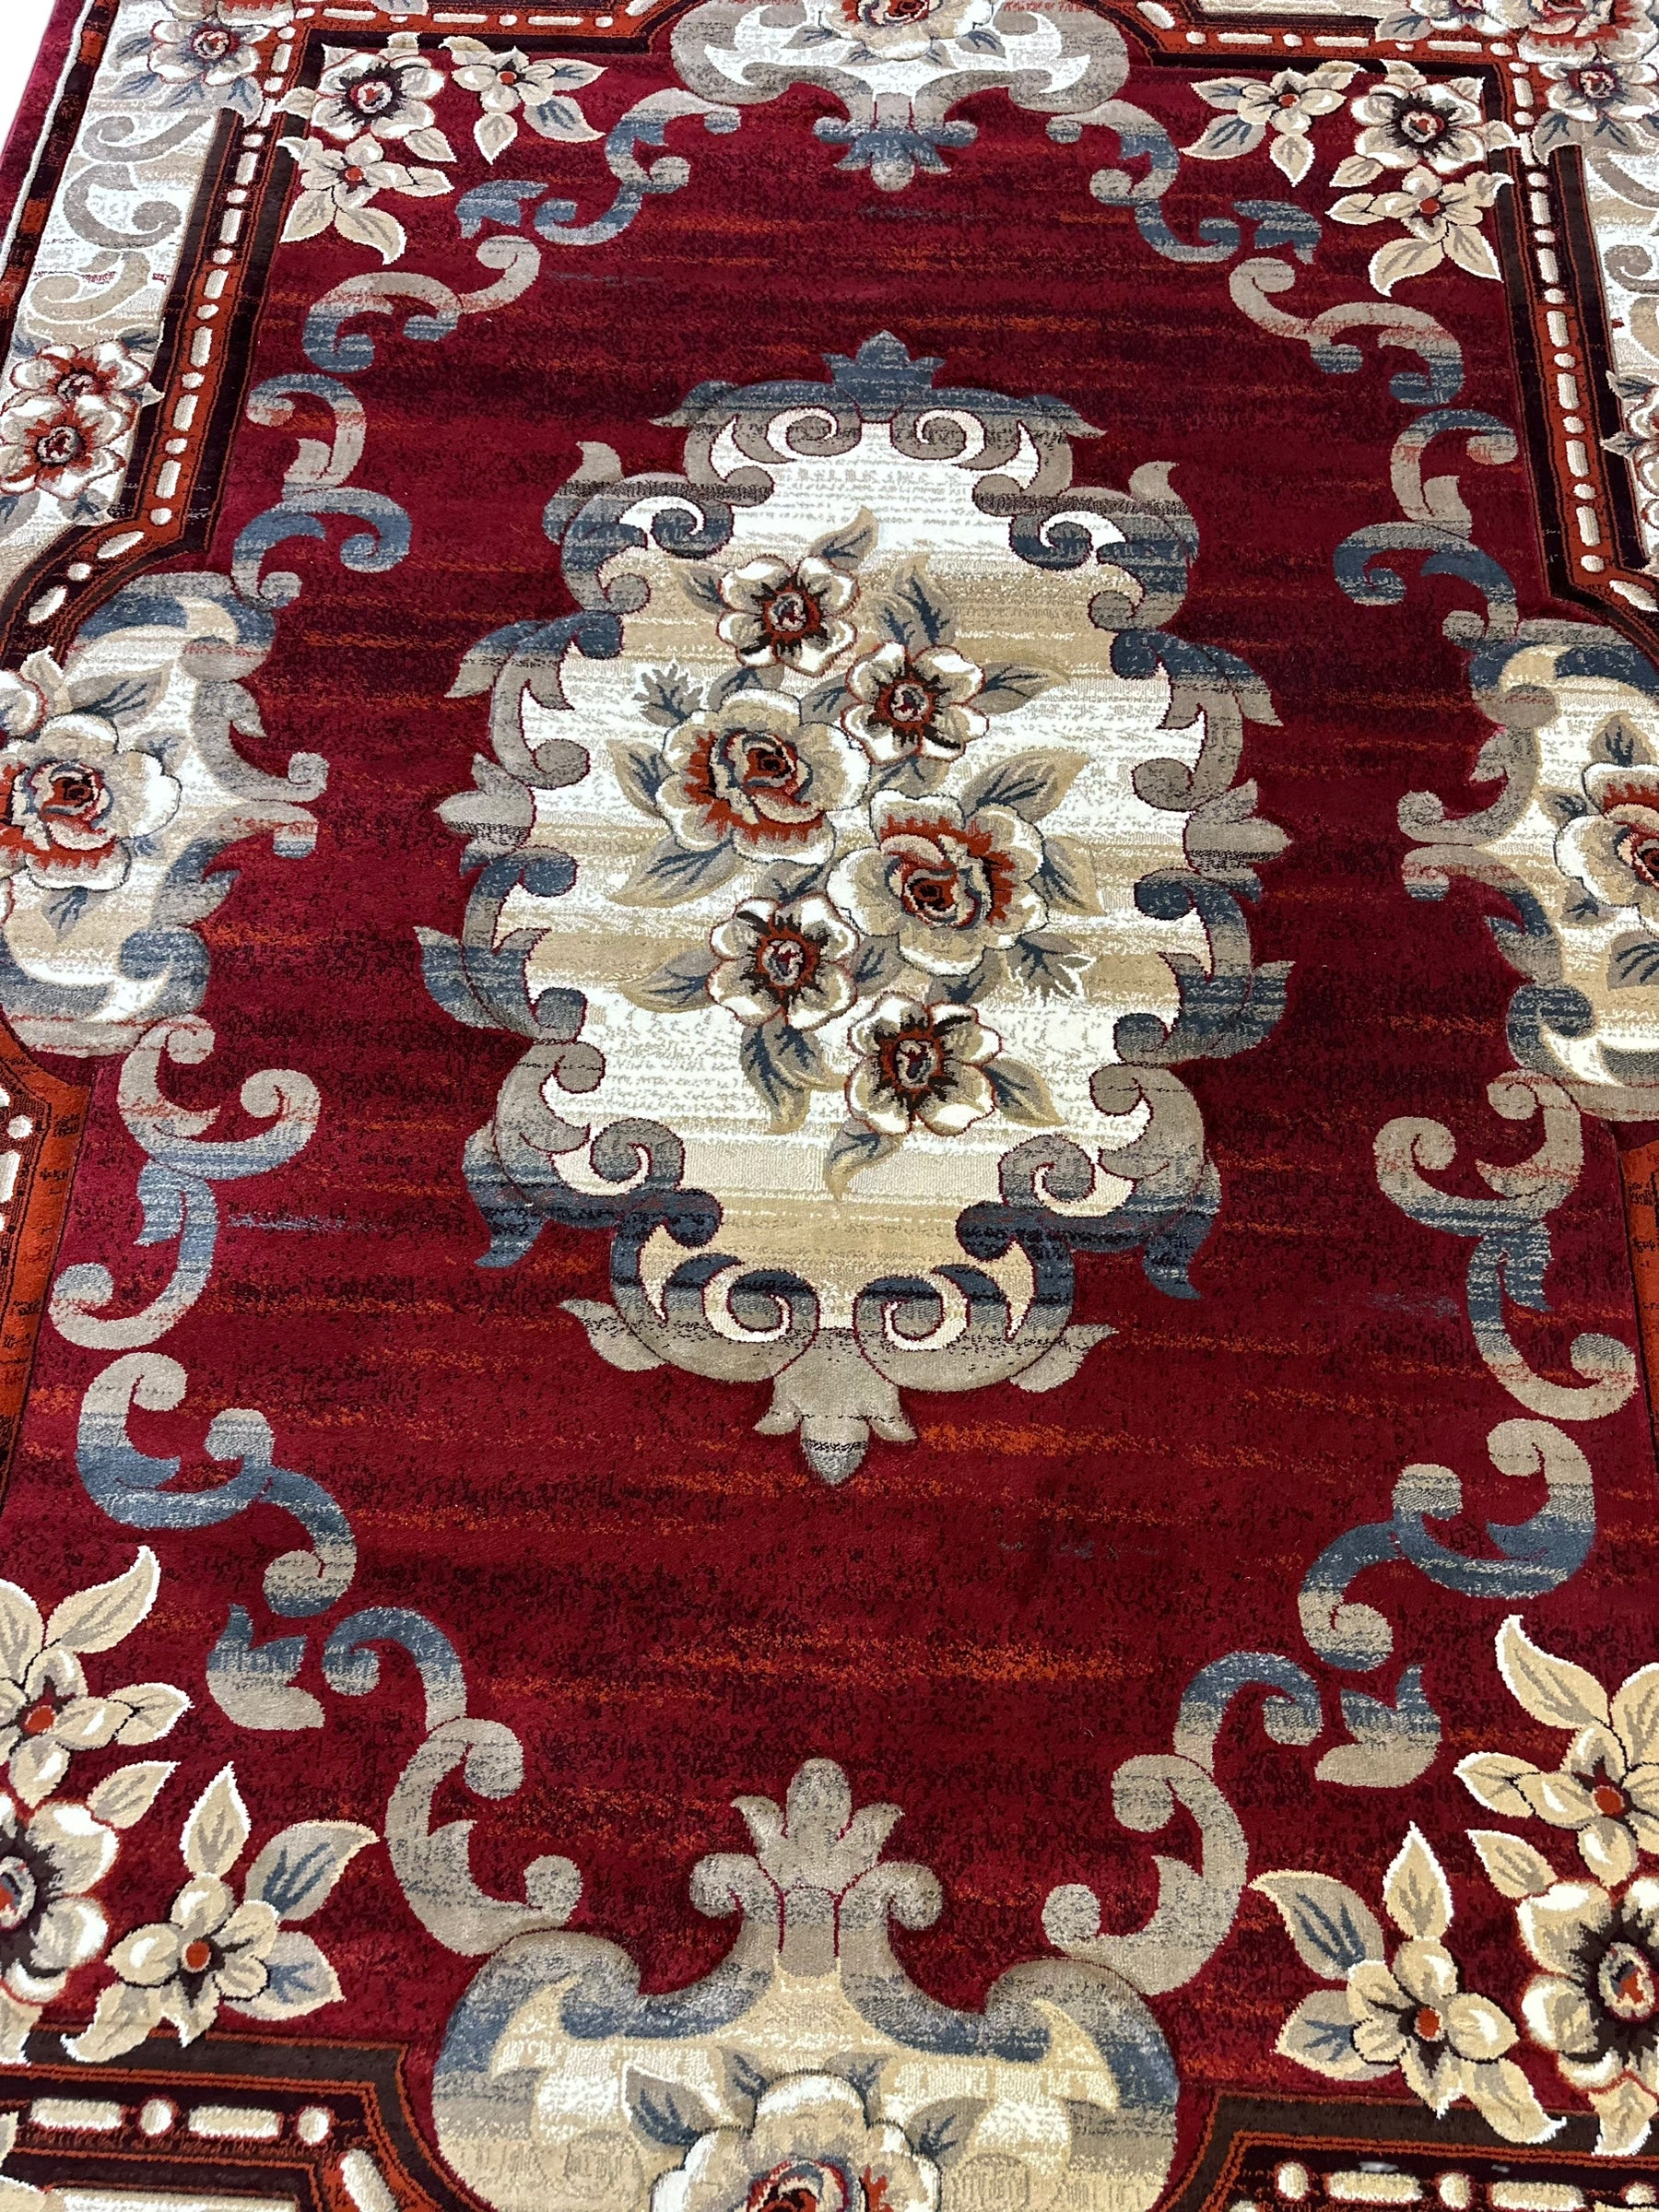 8'x10' Turkish Rug | Red Floral | $299